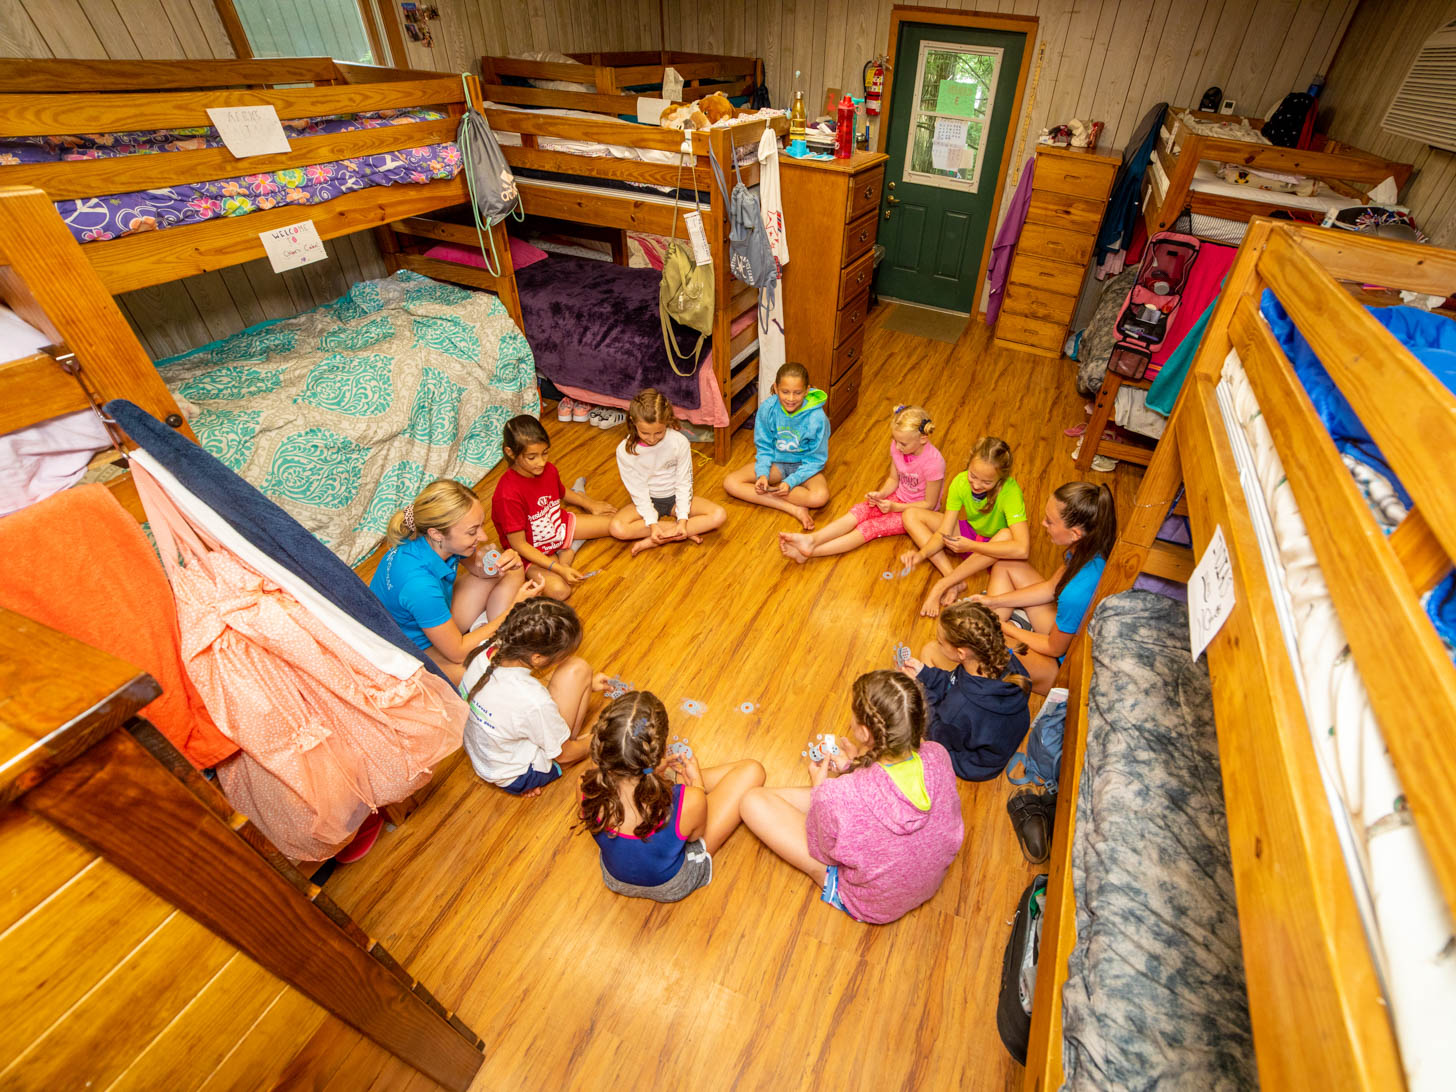 counselors and campers sitting in a circle on the floor of one of the cabins